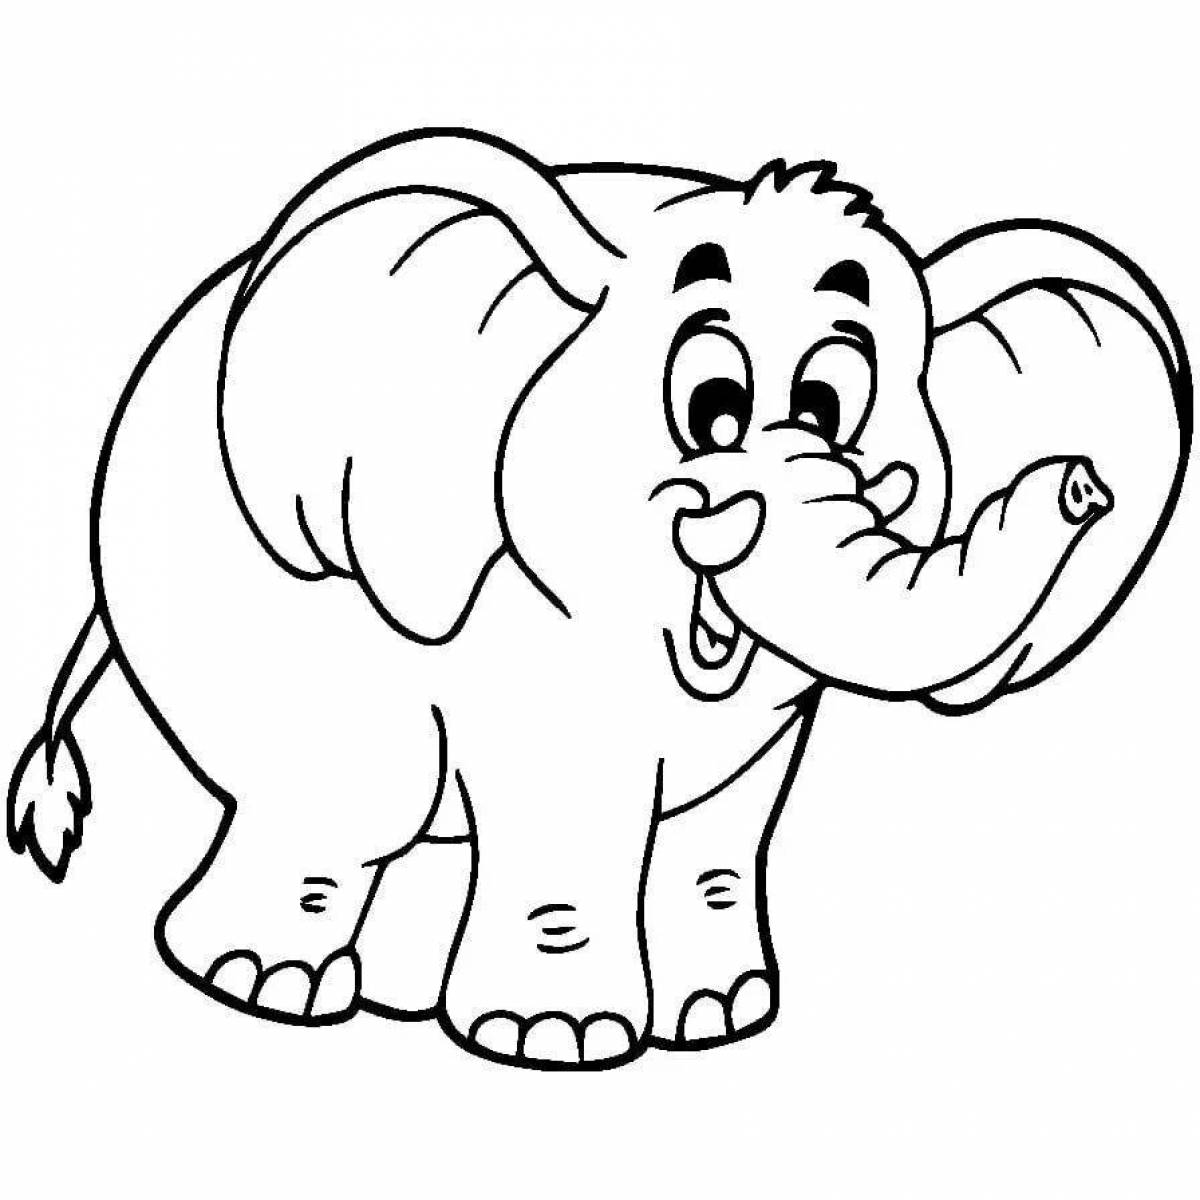 Bright elephant coloring page